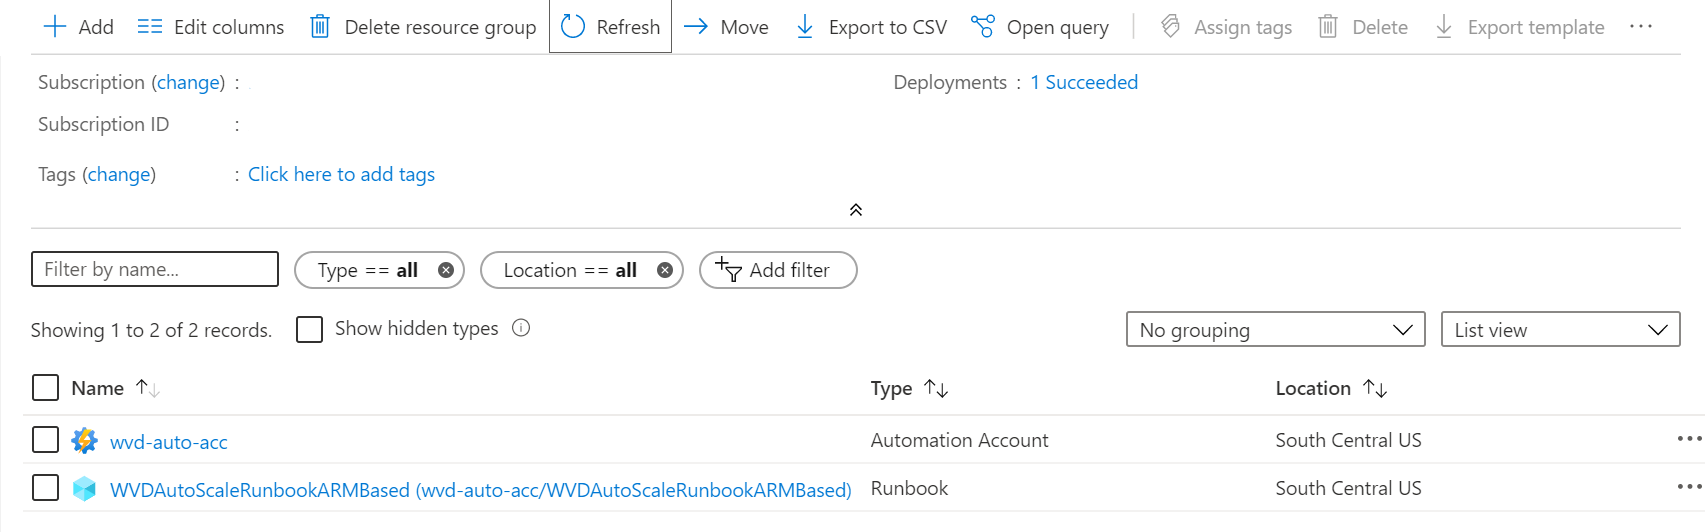 An image of the Azure overview page showing the newly created automation account and runbook.